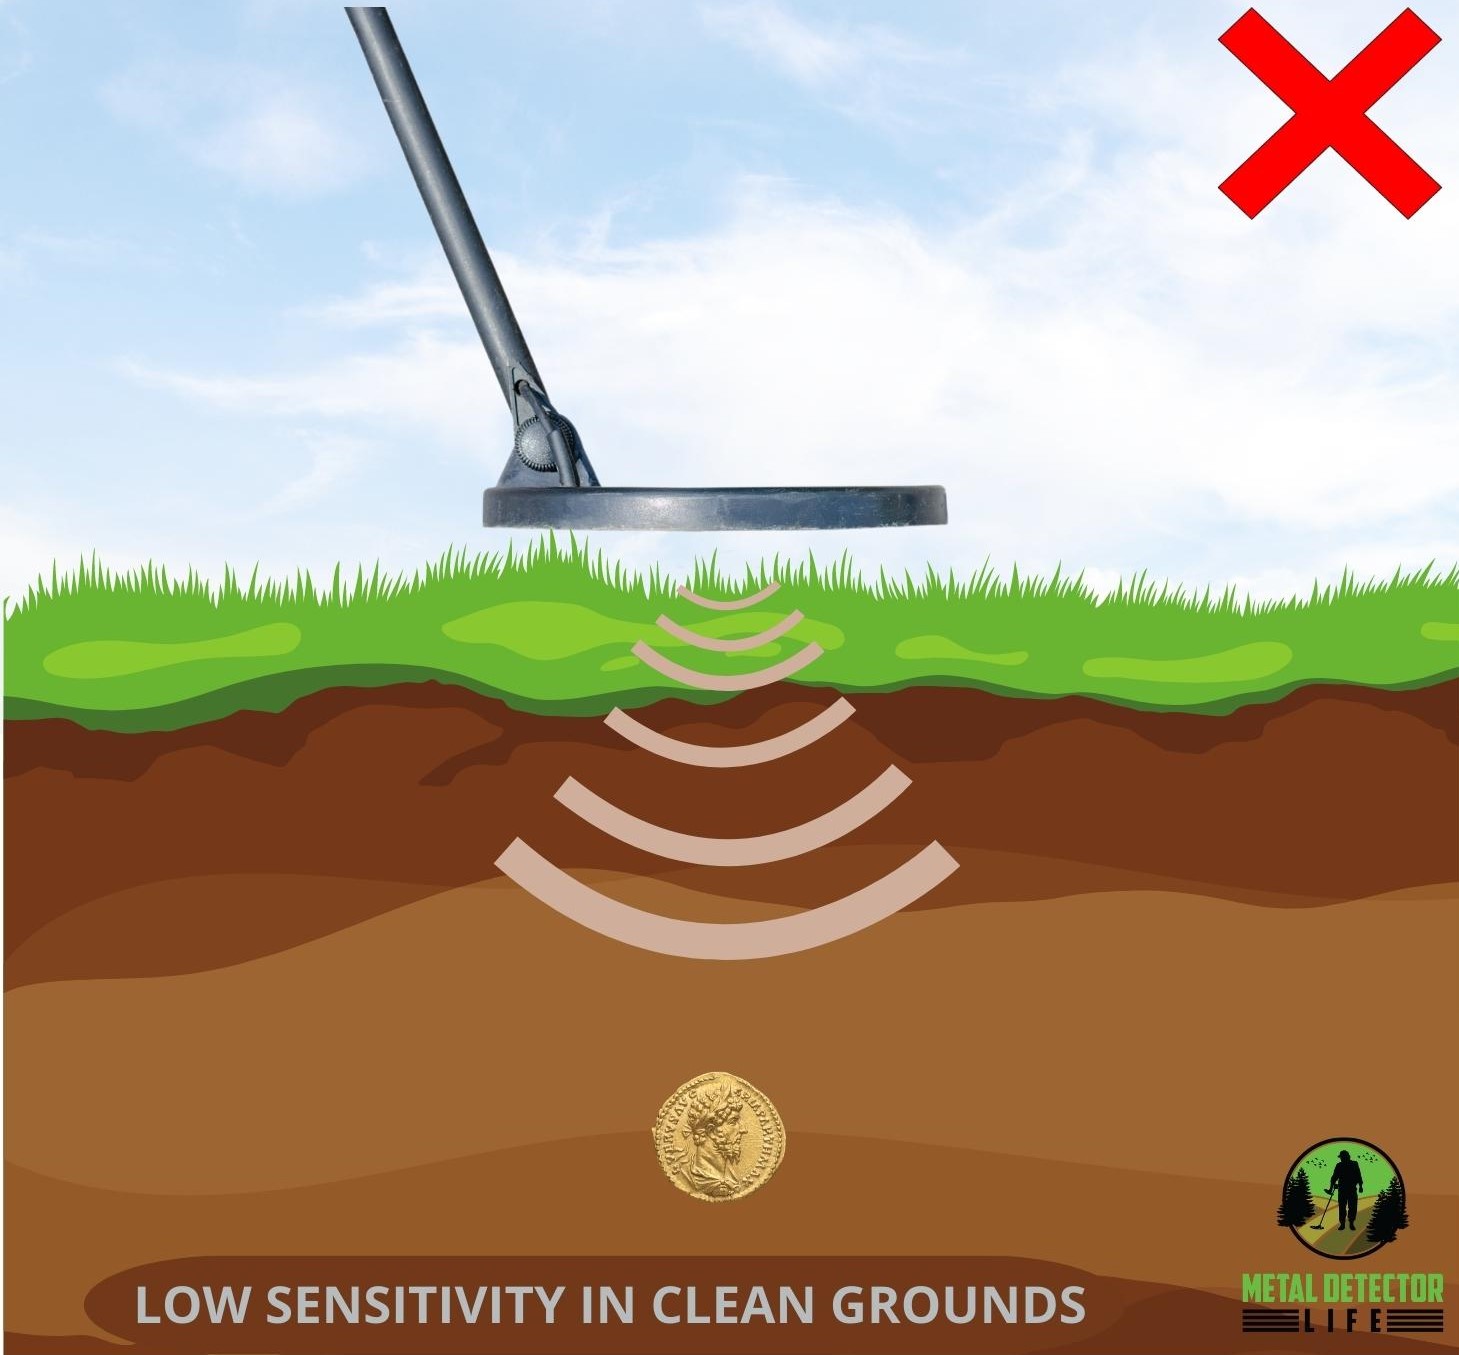 Using a too low sensitivity level in clean ground can lead to missing targets. 